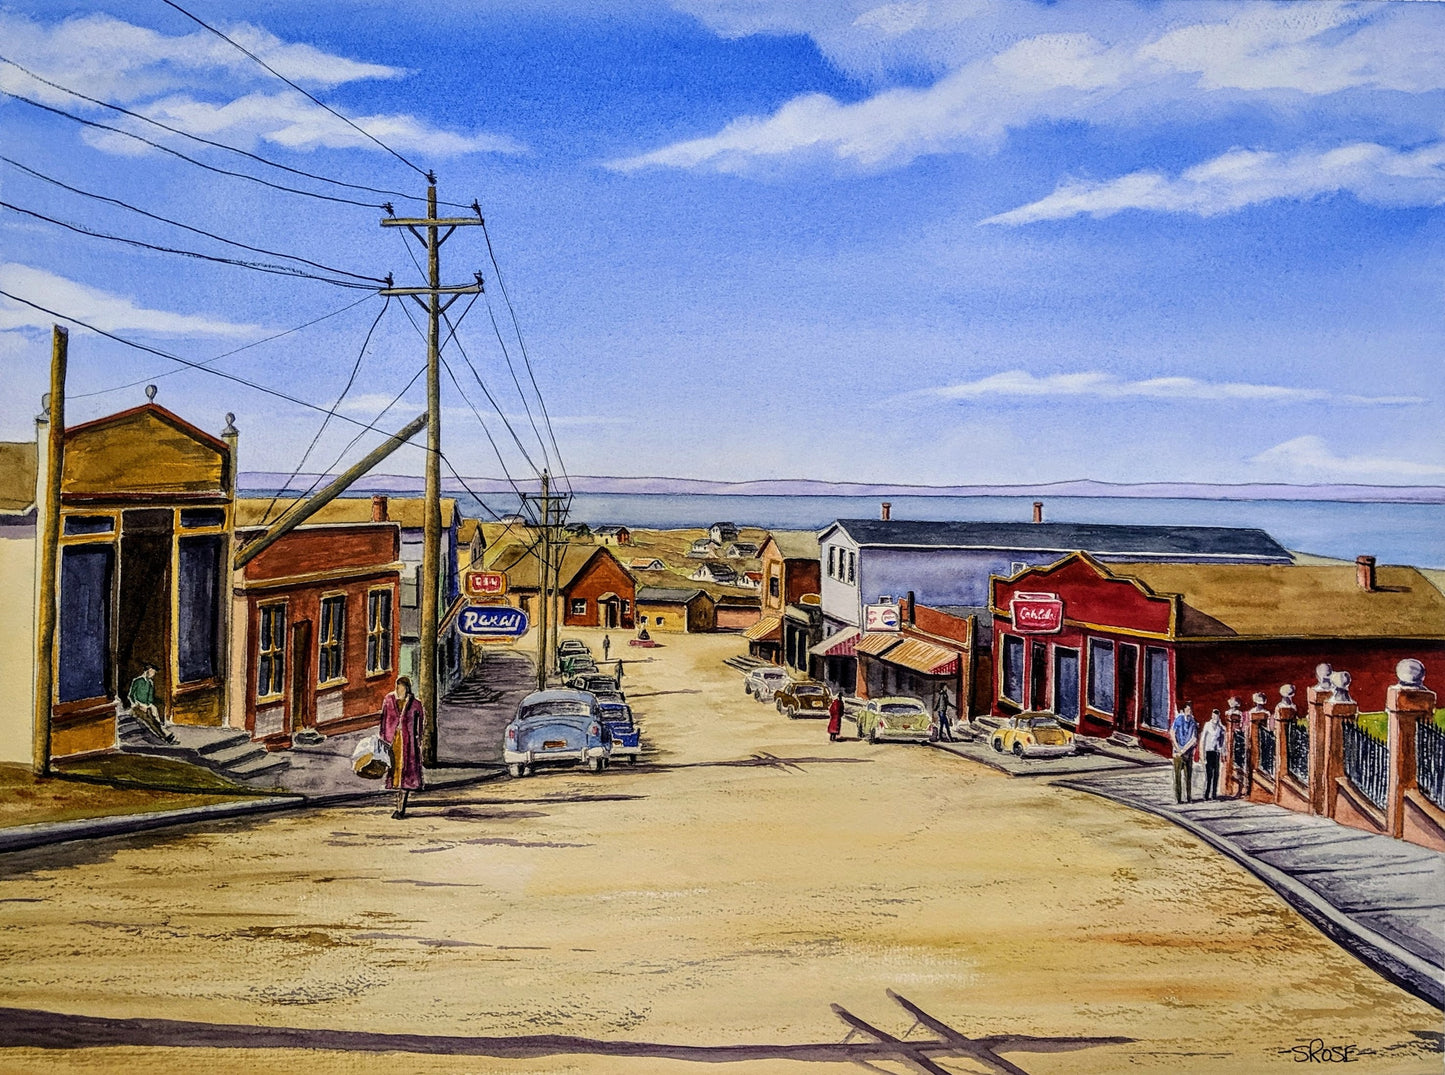 Old Town Square, Bell Island, Newfoundland (11 x 15 inch print)